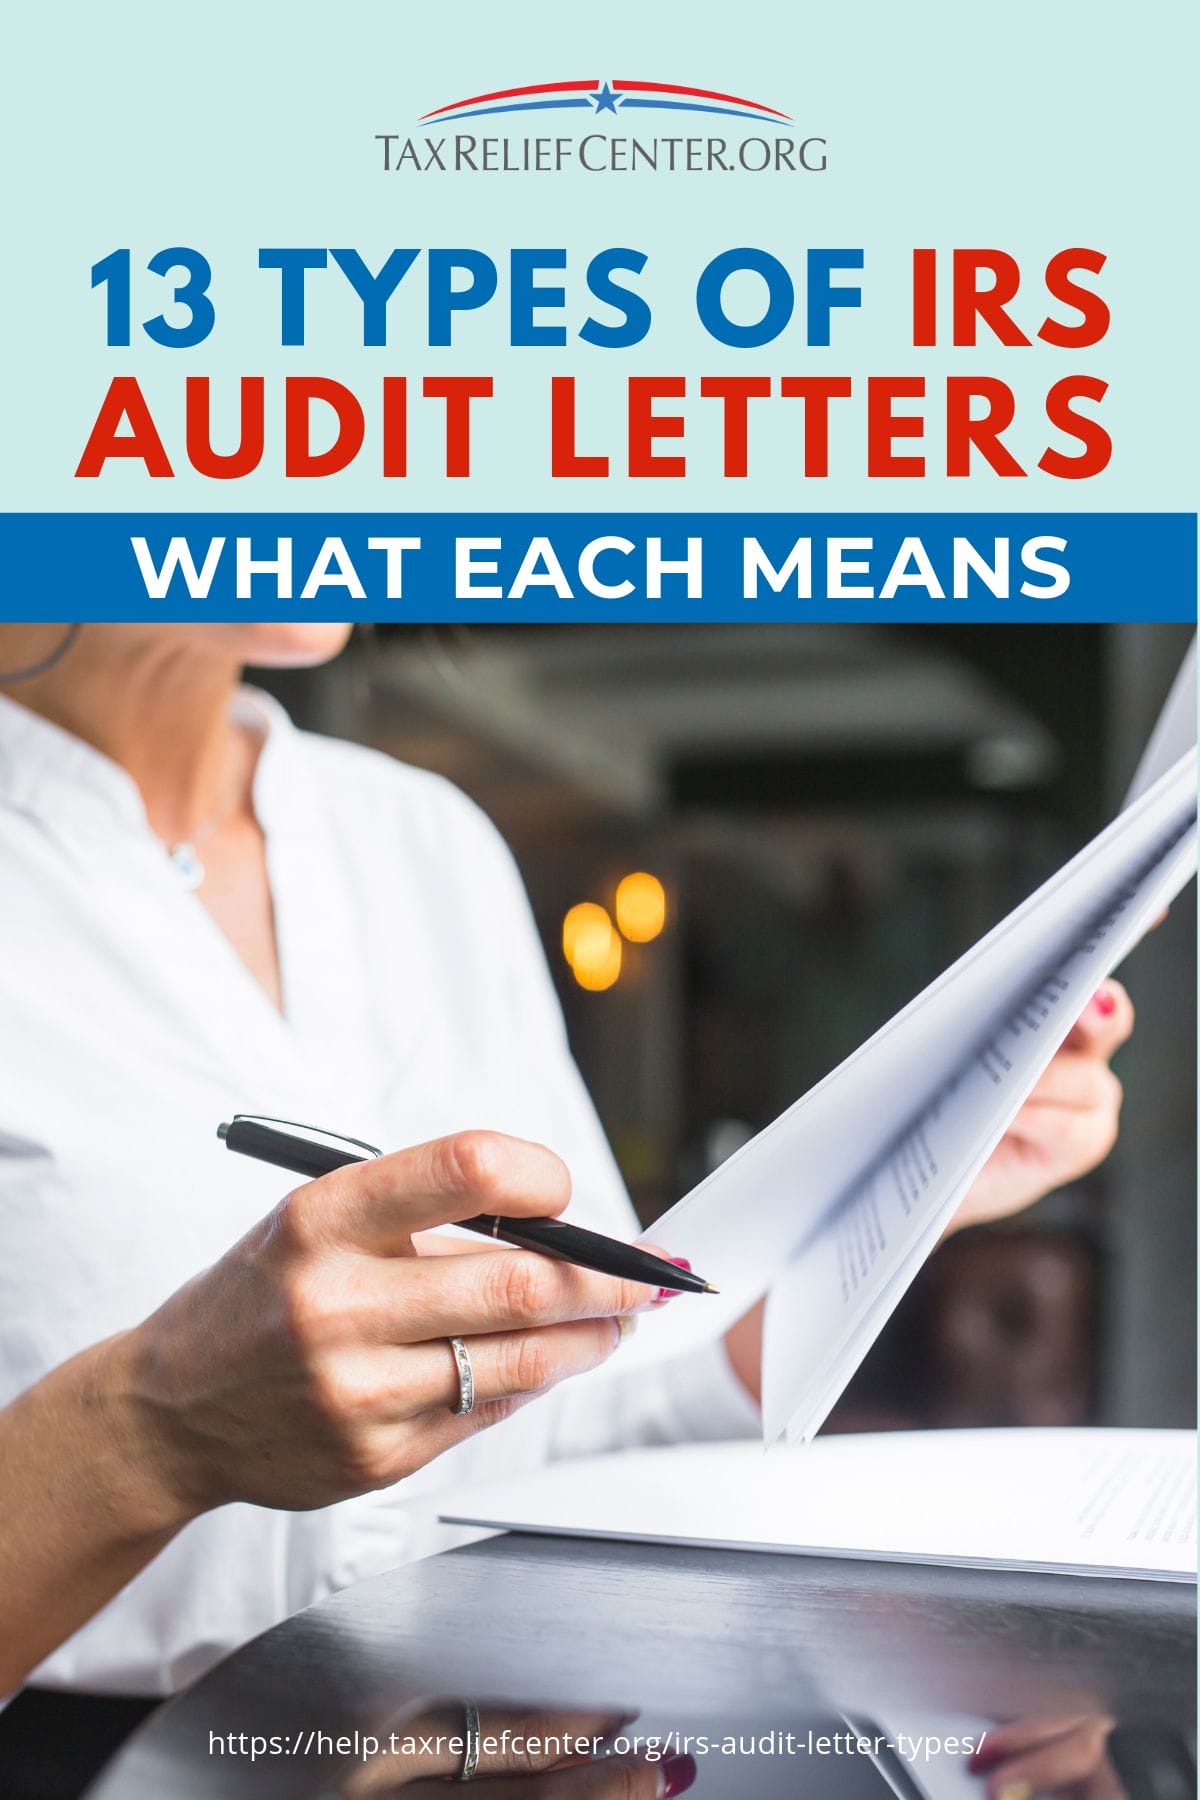 13 Types Of IRS Audit Letters And What Each Means https://help.taxreliefcenter.org/irs-audit-letter-types/